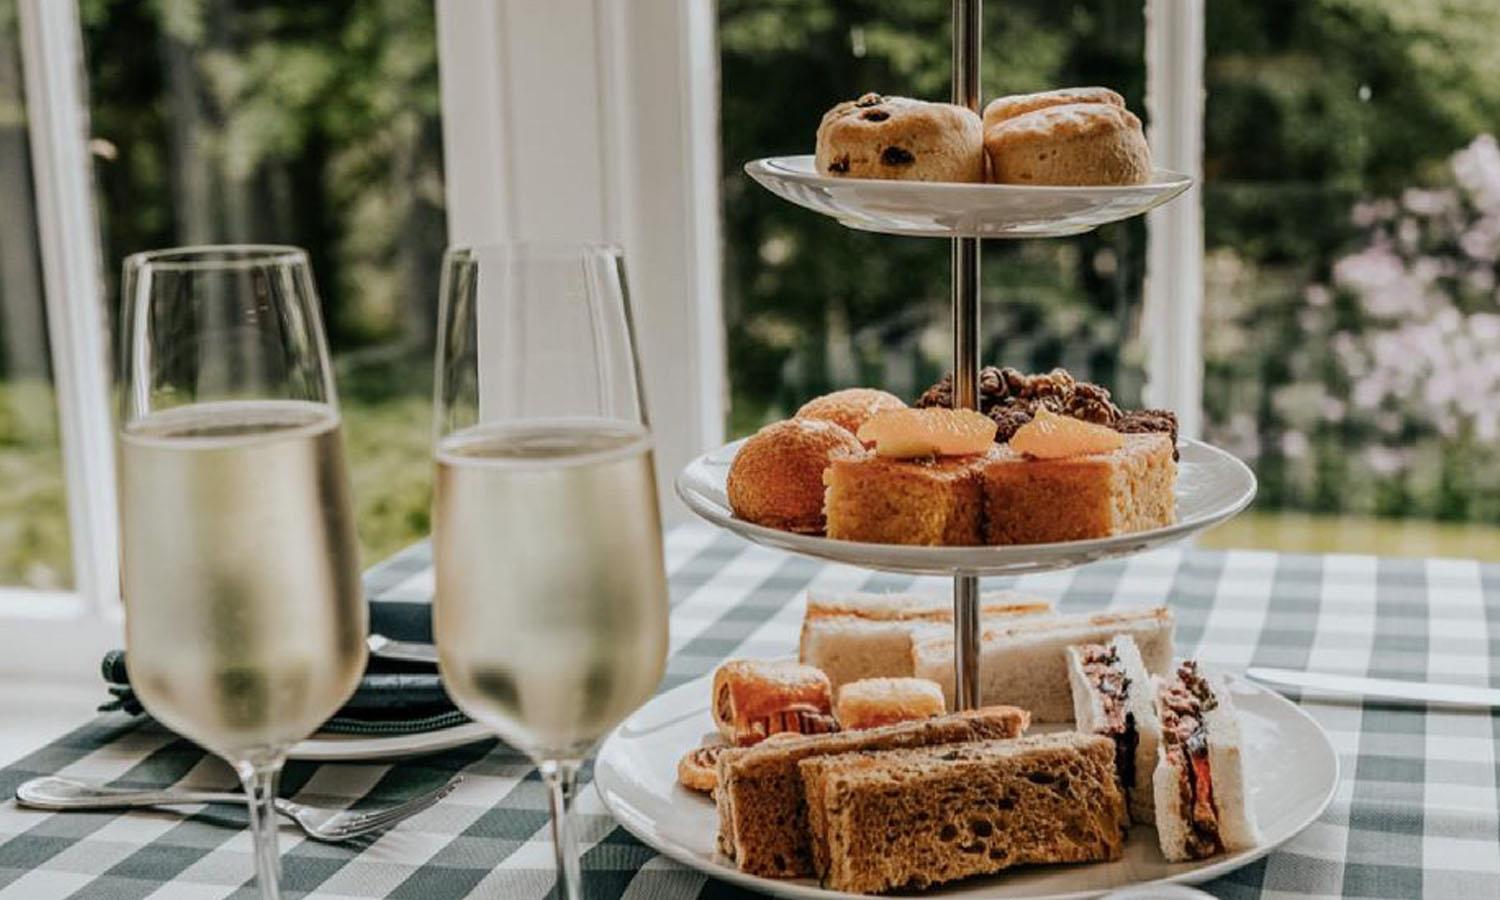 Afternoon tea with prosecco at Forss House hotel